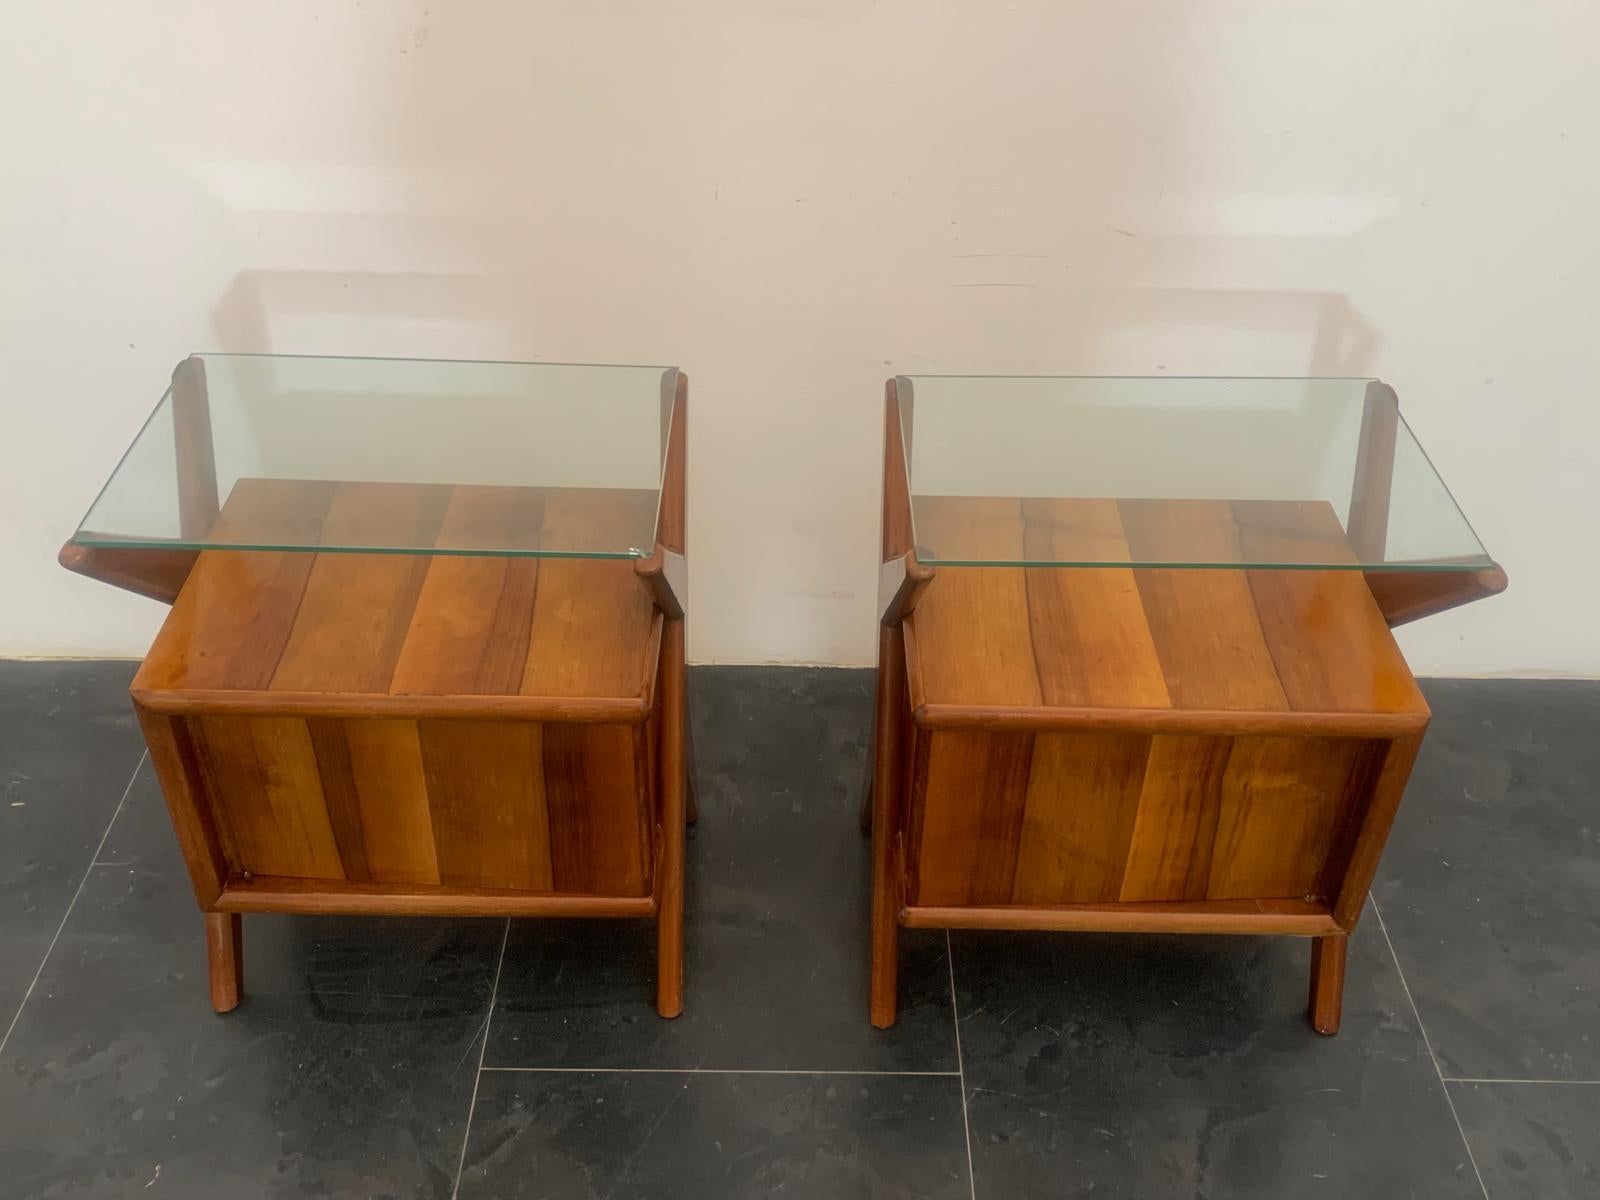 Mid-Century Modern Bedside Tables in Rosewood with Generous Glass Topб Set of 2 For Sale